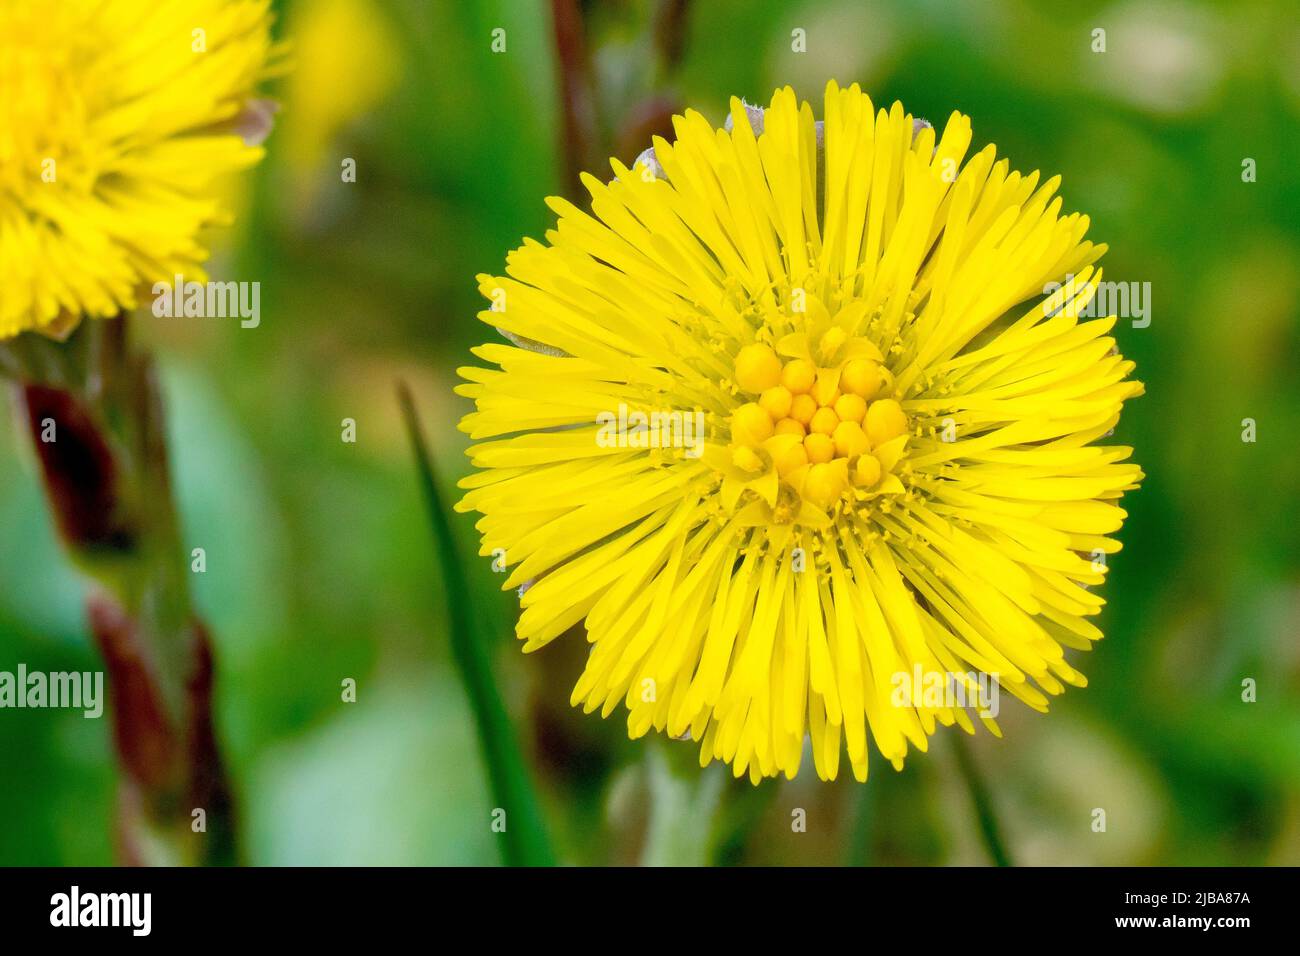 Coltsfoot (tussilago farfara), close up focusing on a single bright yellow flower, a common sight on disturbed ground and on dunes during spring. Stock Photo